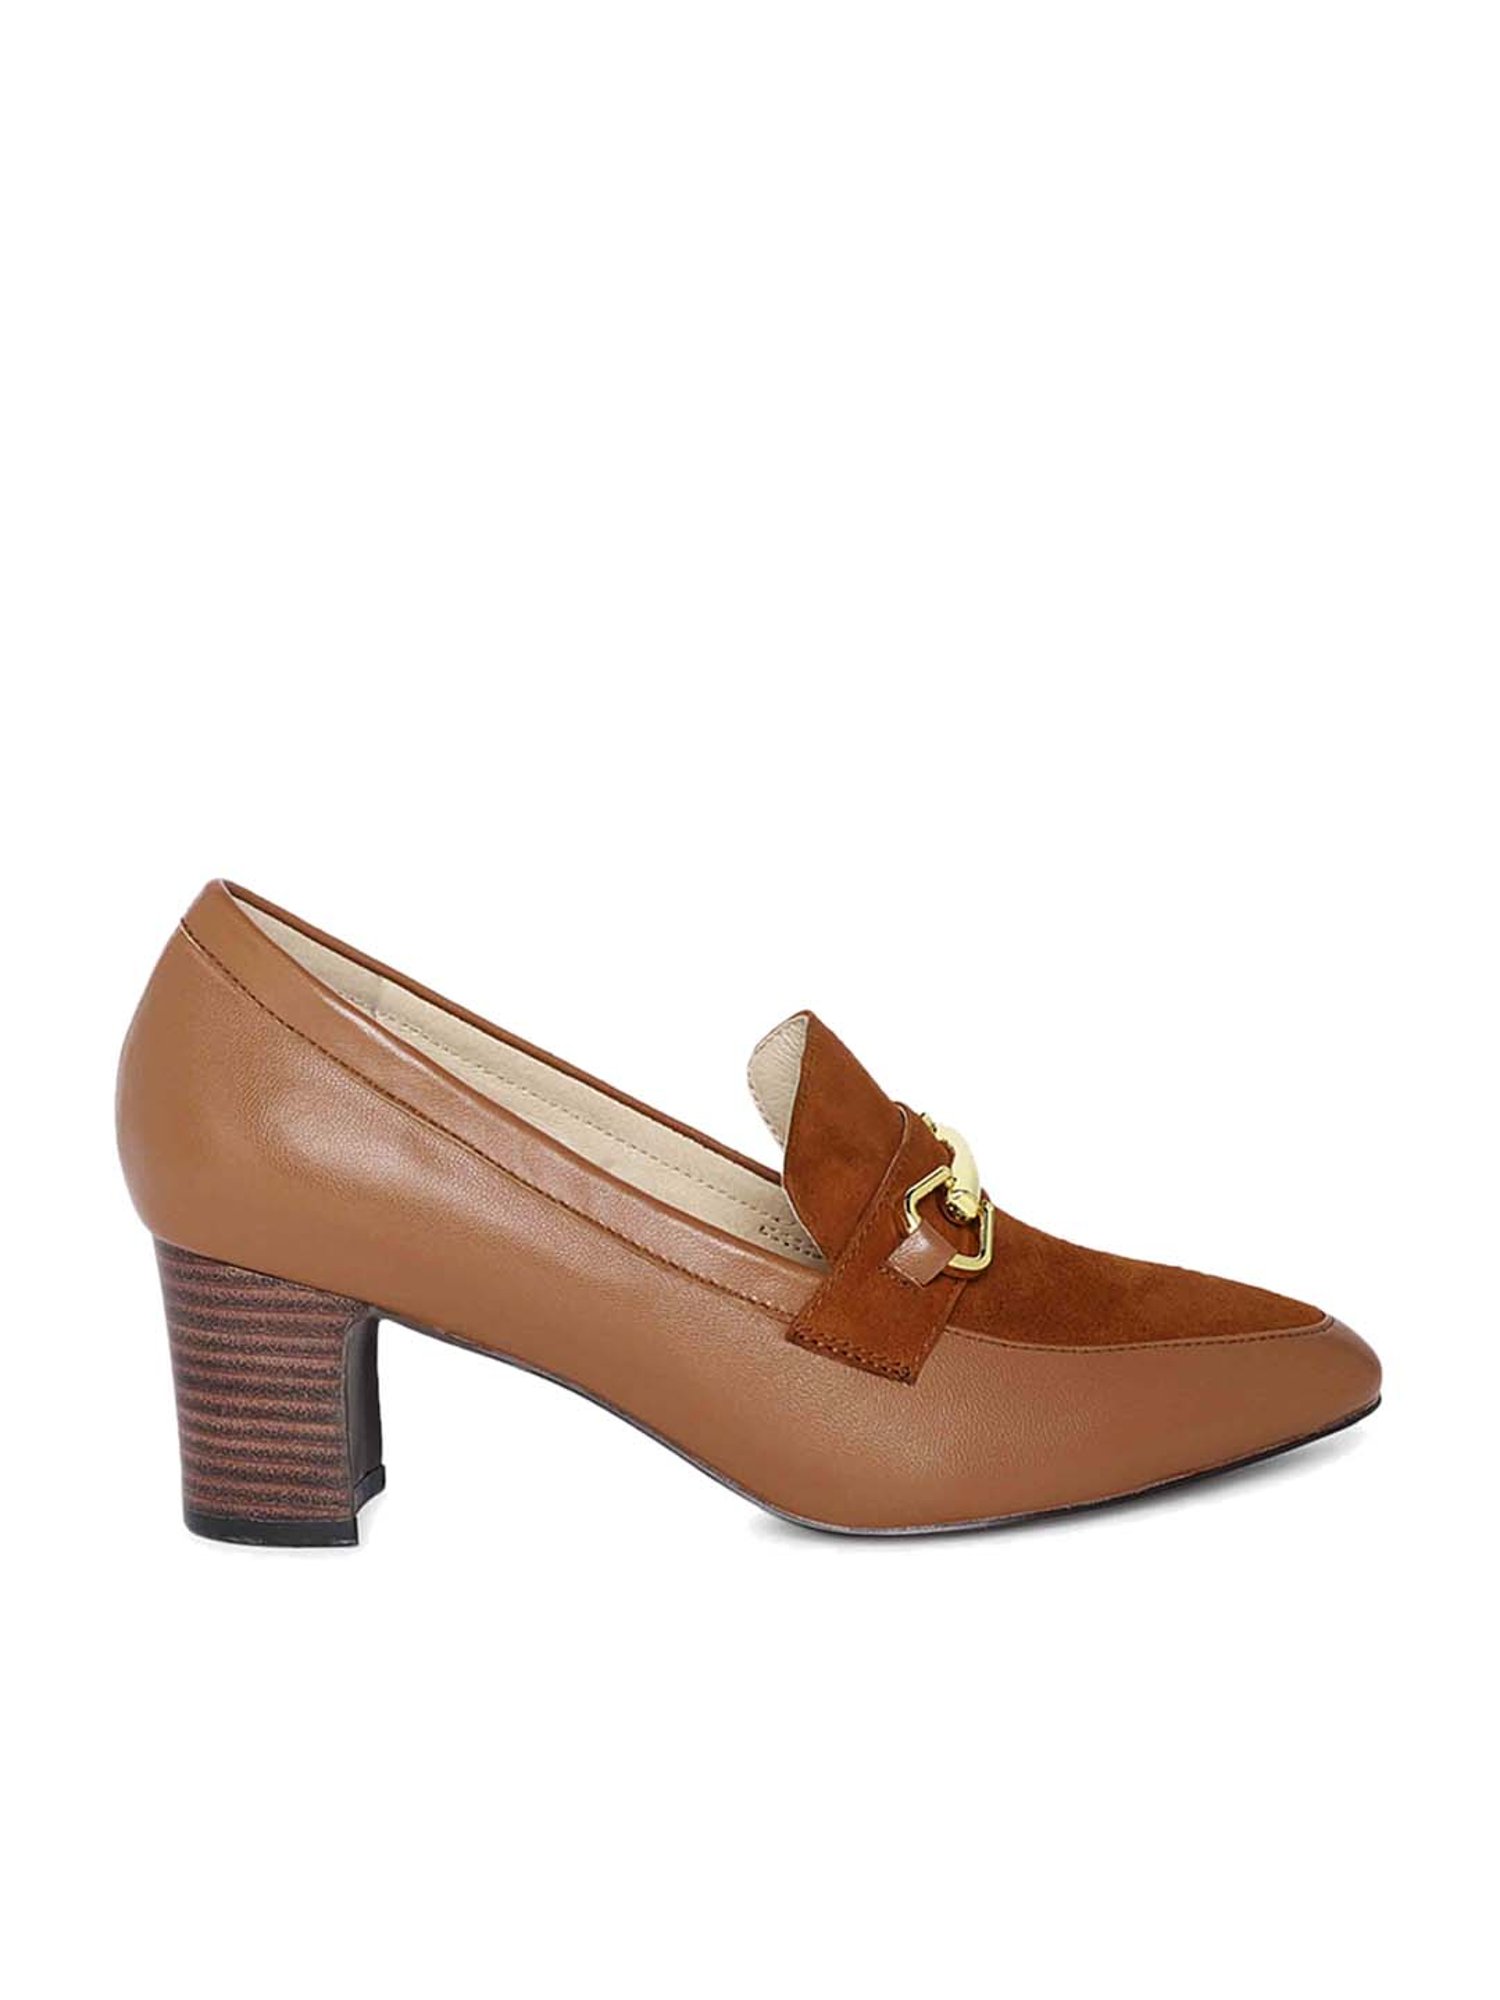 Ghillie Detail Heeled Loafers - Golden Brown Suede | Boden US